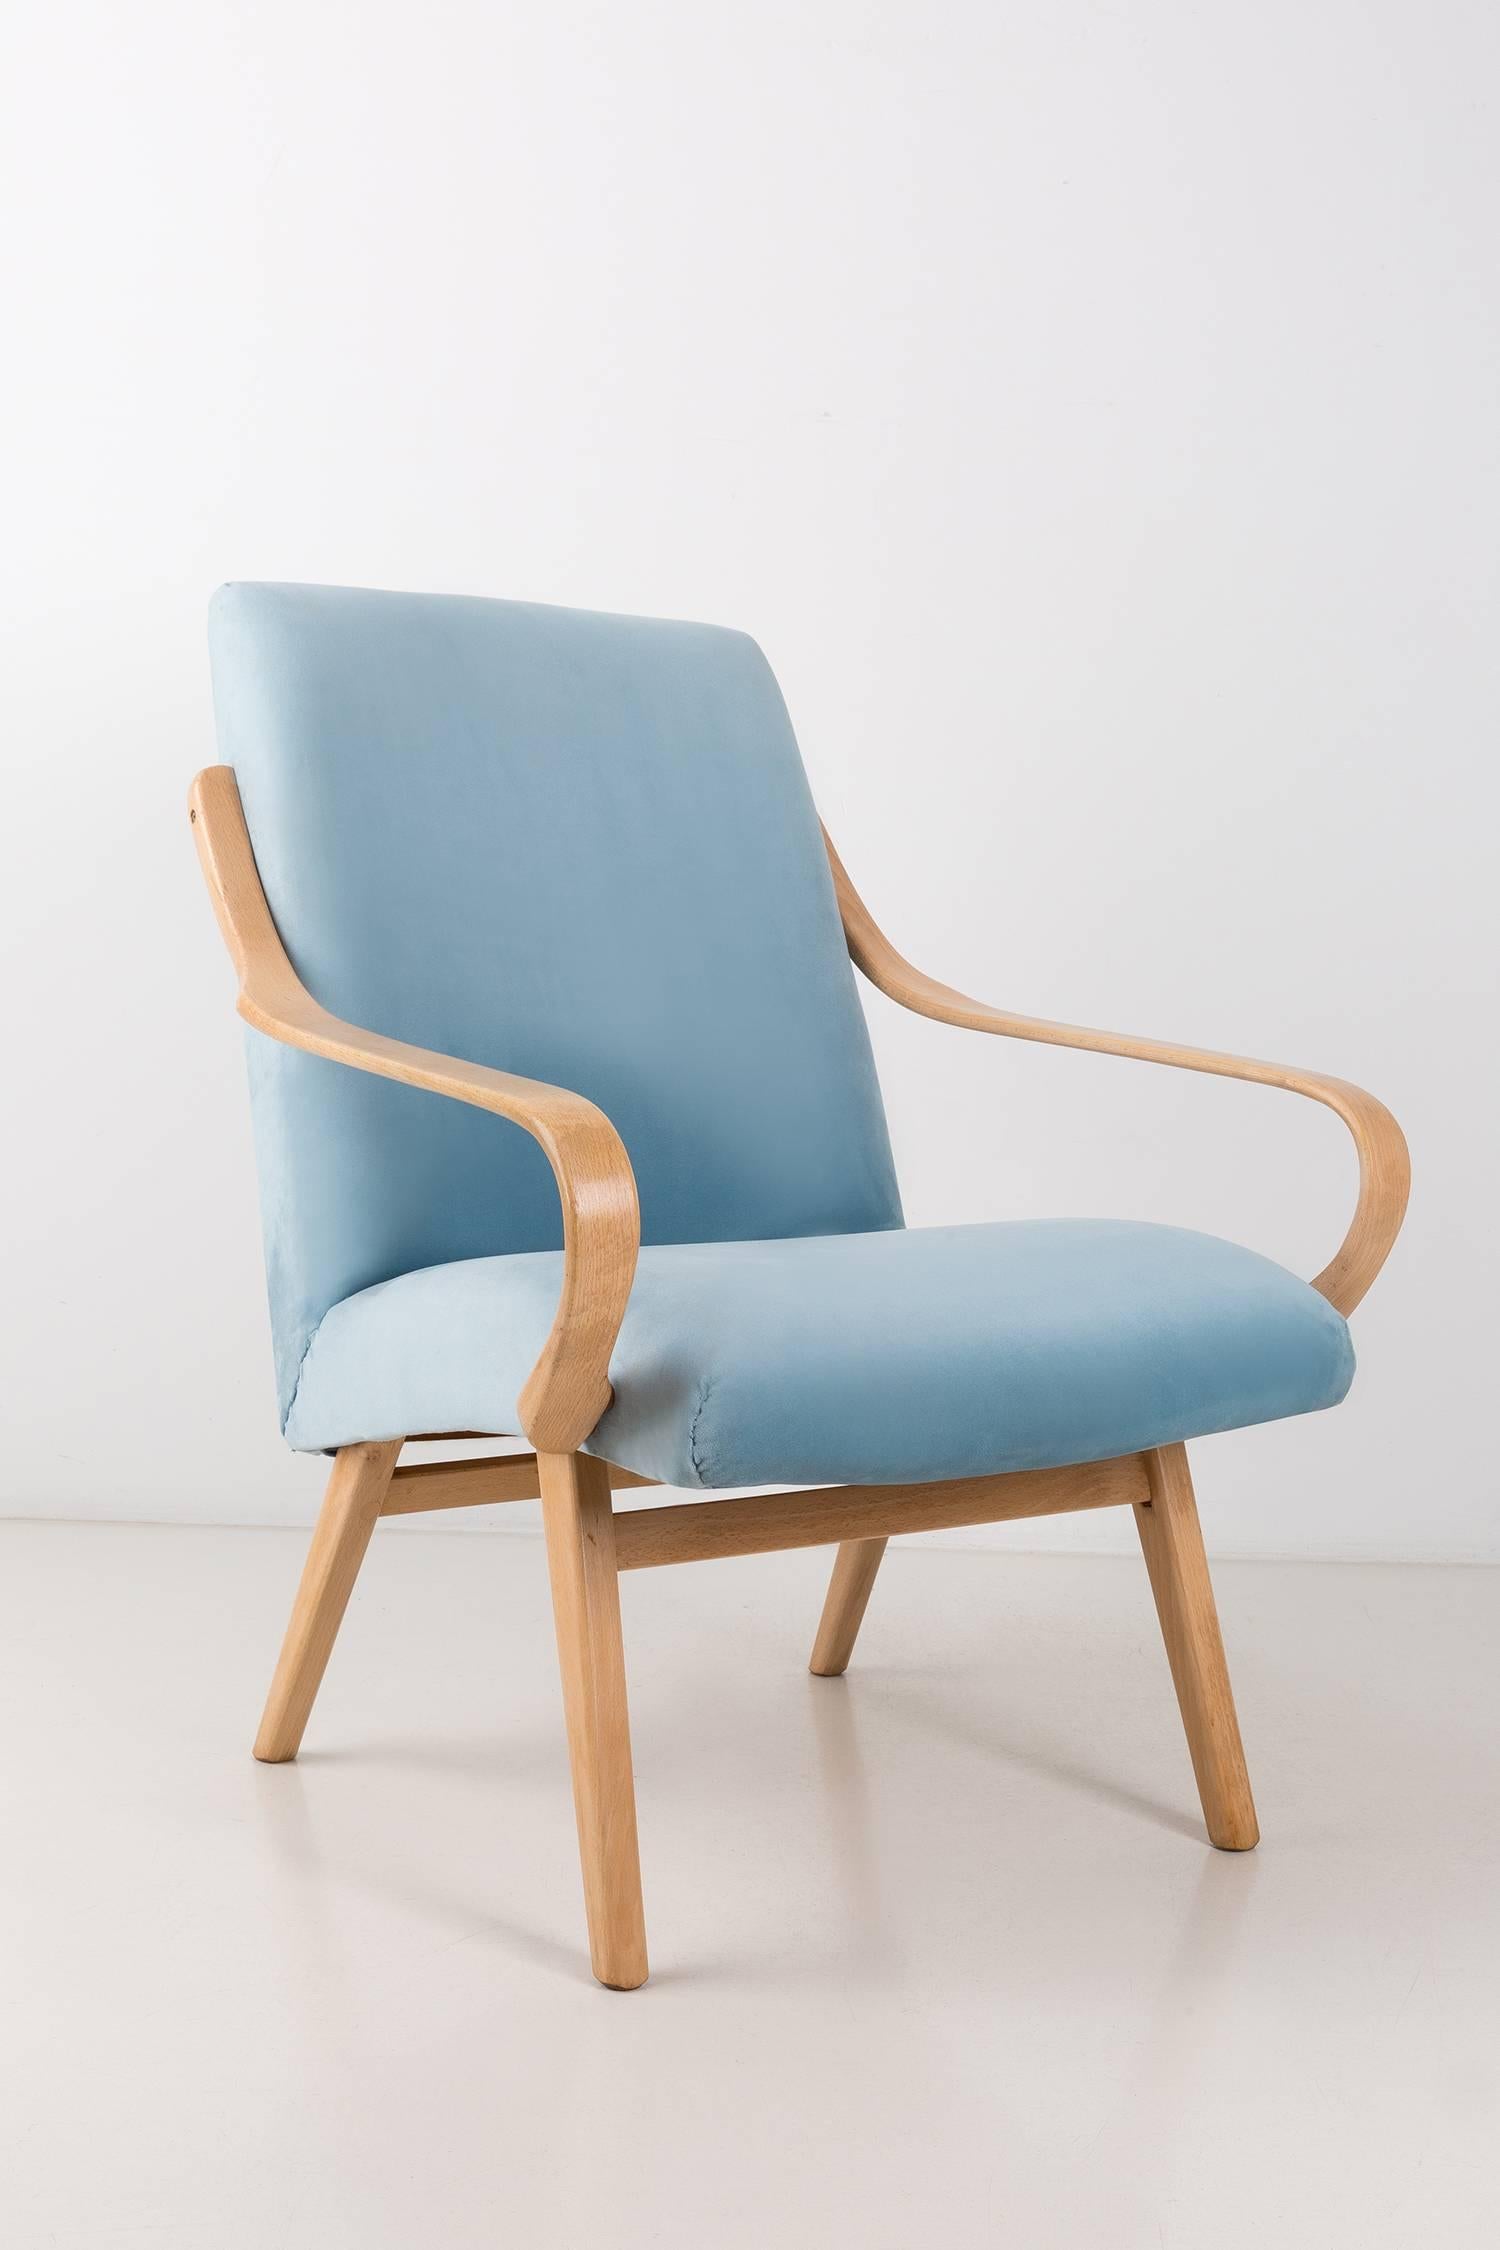 Armchairs designed by Jaroslav Šmidek, type 53. They were manufactured at the Ton factory in the 1960s in Czech Republic. Purified beech wood polished and finished with matt varnish. The upholstery that is covered with the seat and backrest is a